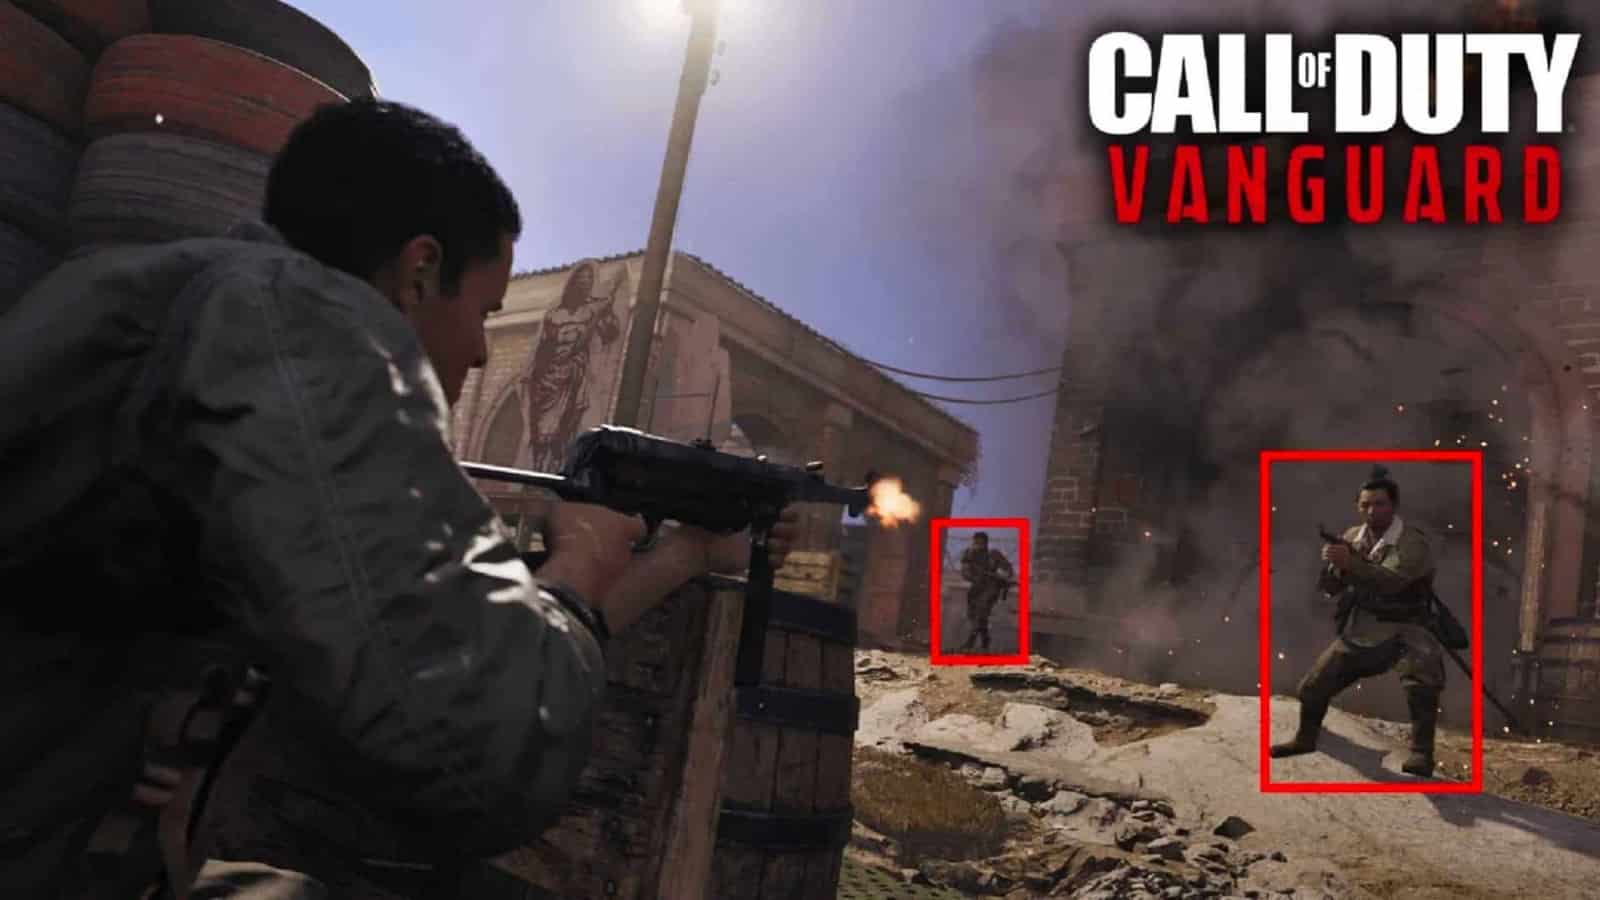 Top 4 Call Of Duty Mobile Hacks & Cheats To Try Without Getting Banned